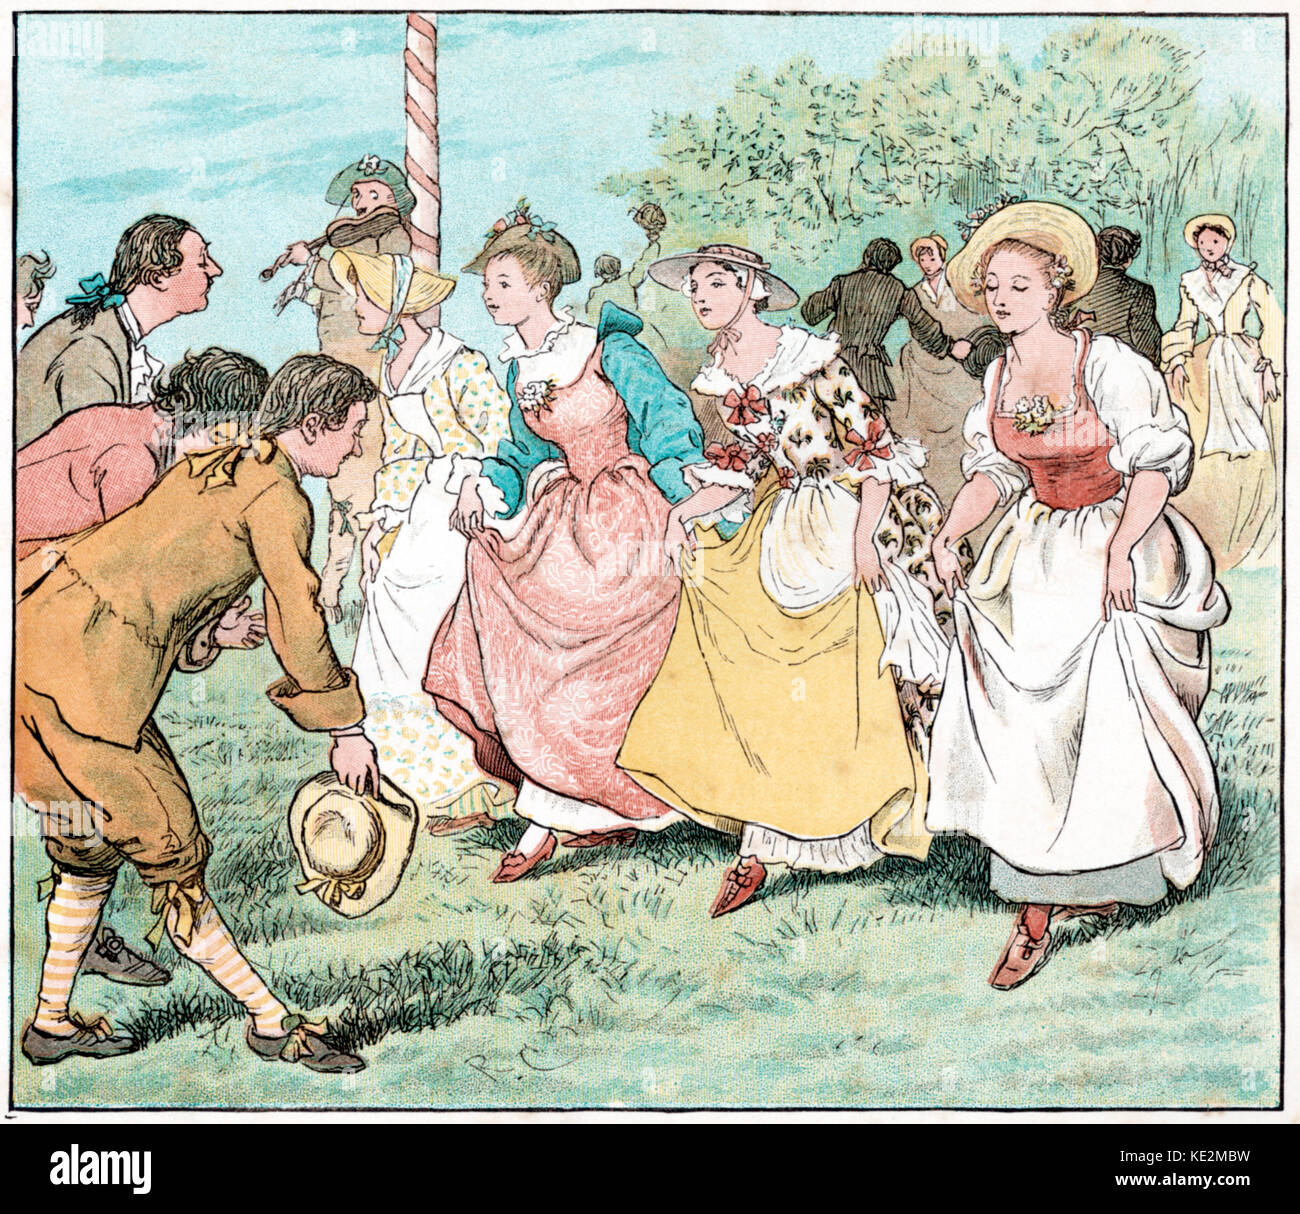 English folk dancing, 18th century.  By Randolph Caldecott (English illustrator, 22 March 1846 - 12 February 1886).  Country dancing, fiddle player, bowing, curtsey, curtsy.  Breeches Stock Photo